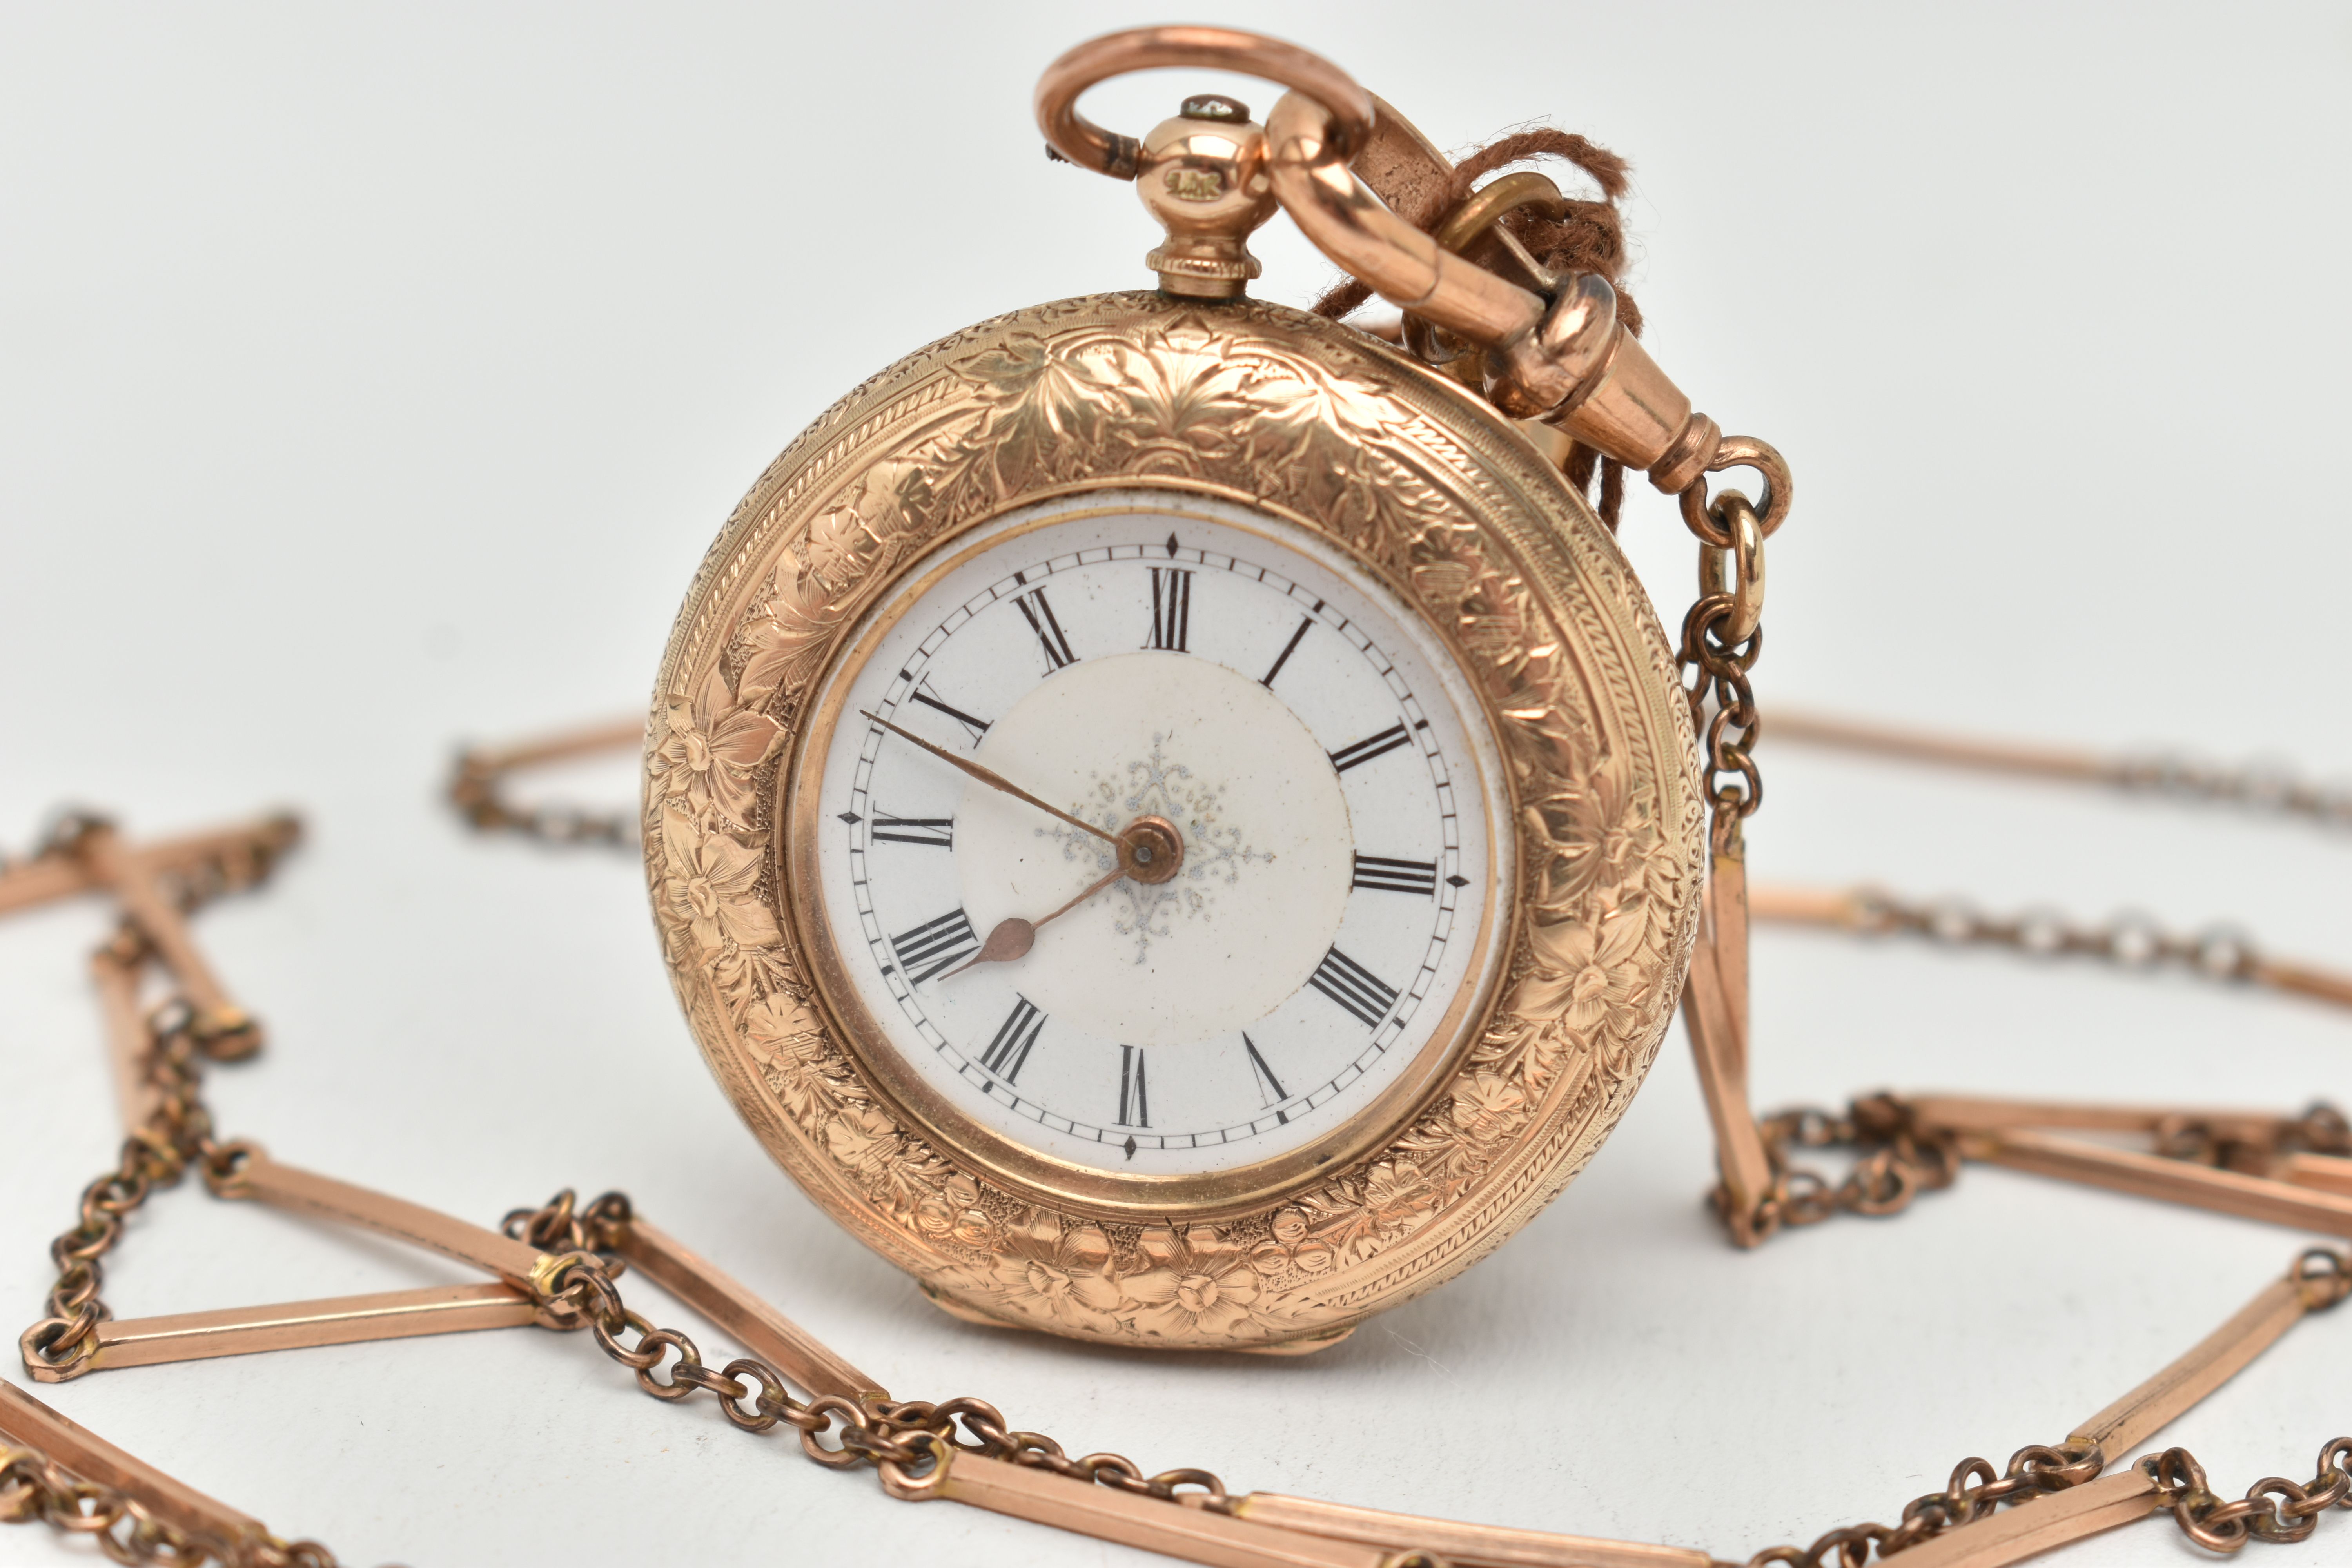 A YELLOW METAL POCKET WATCH AND LONGUARD CHAIN, key wound half hunter pocket watch, floral and - Image 2 of 6